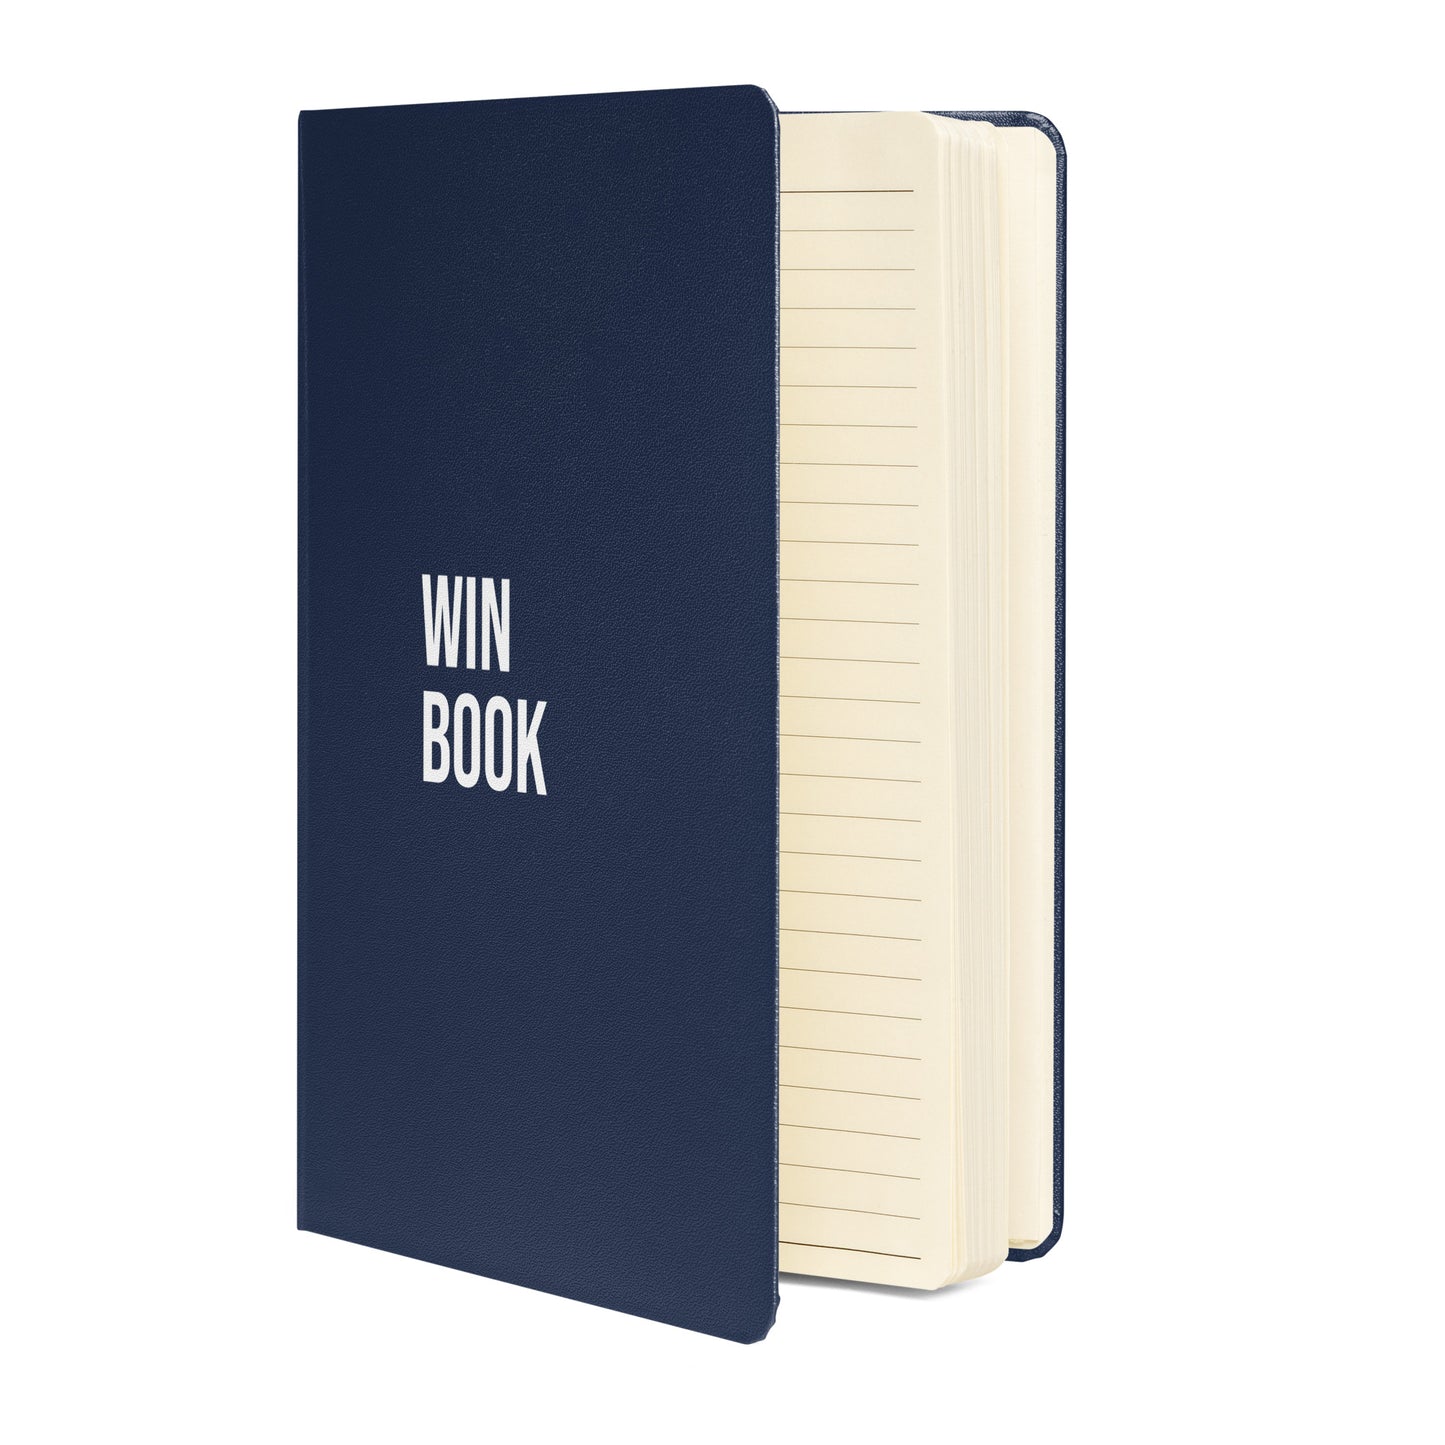 Win Book | Hardcover Bound Notebook